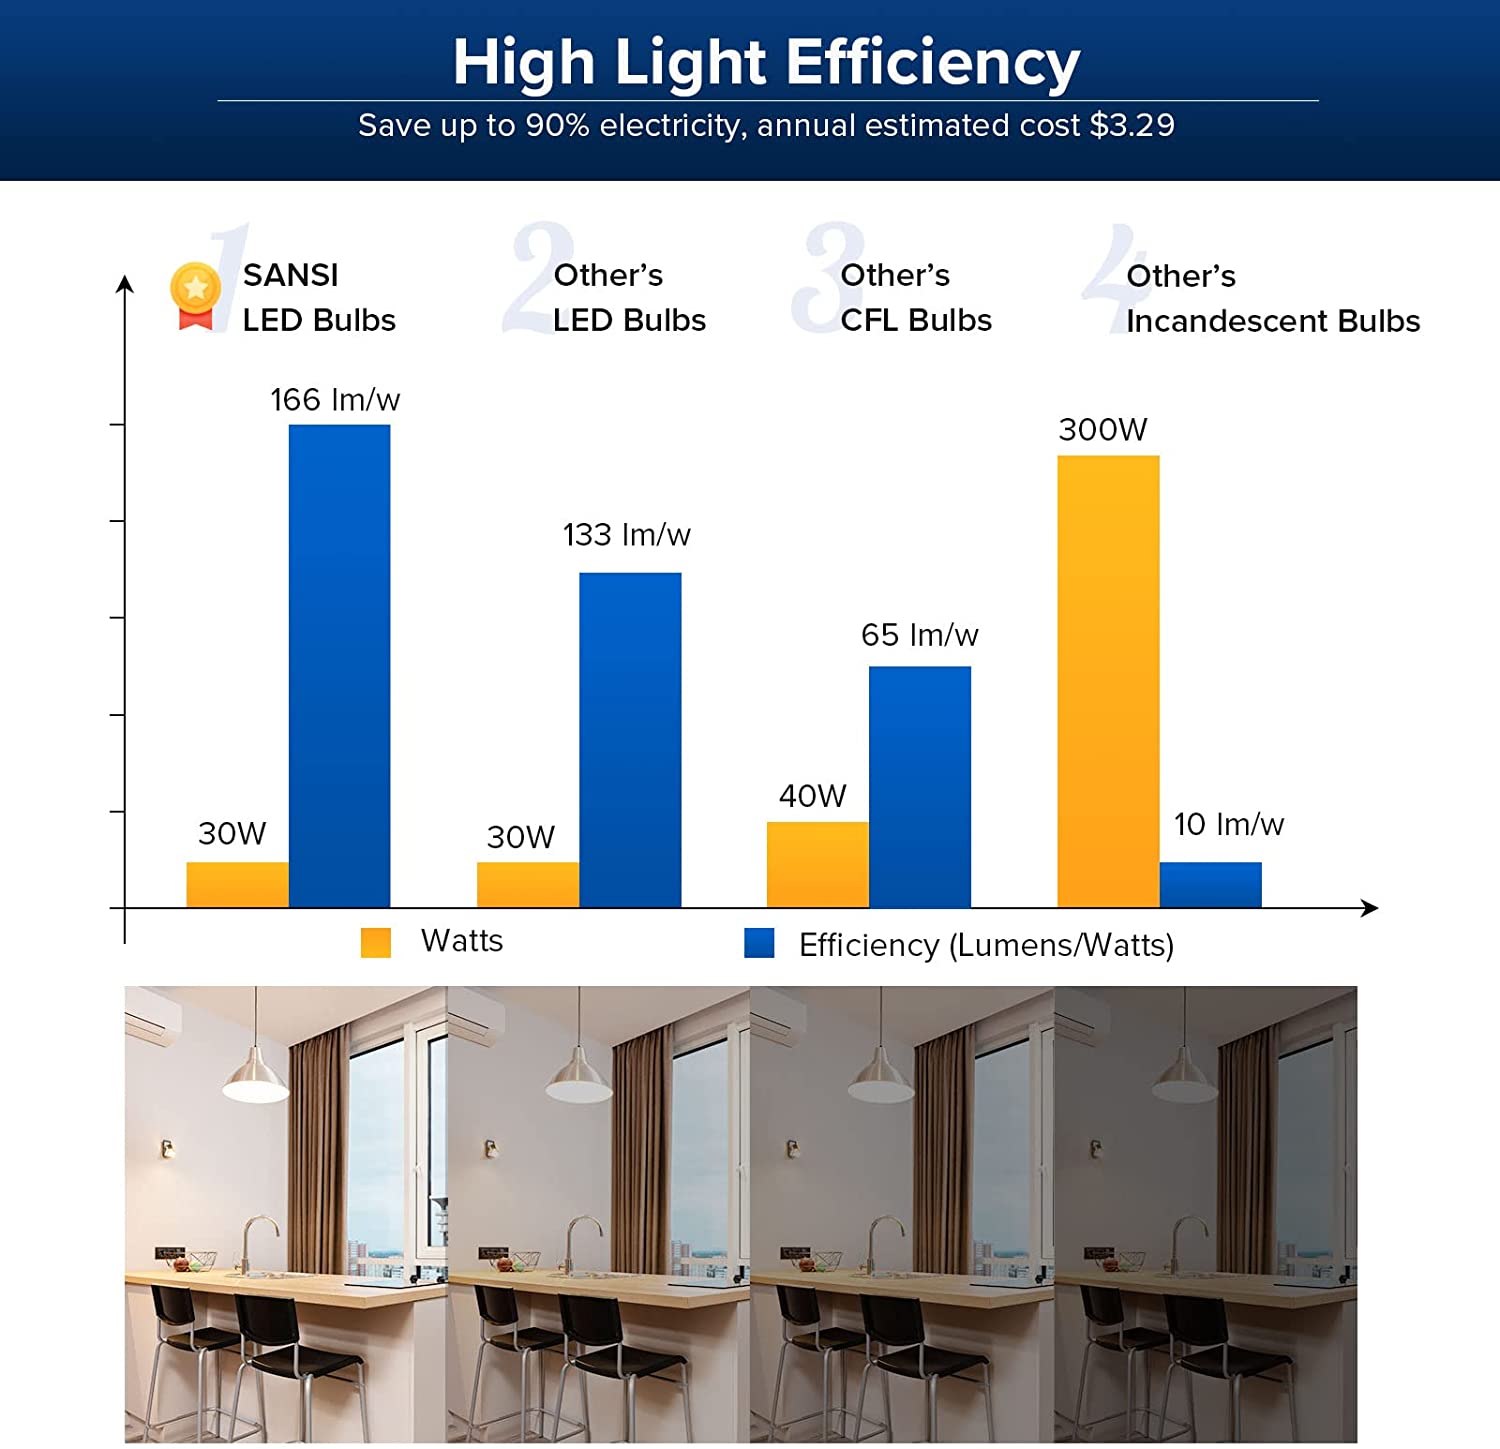 A21 30W LED Light Bulb has high light efficiency，save up to 90% electricity, annual estimated cost $3.29.